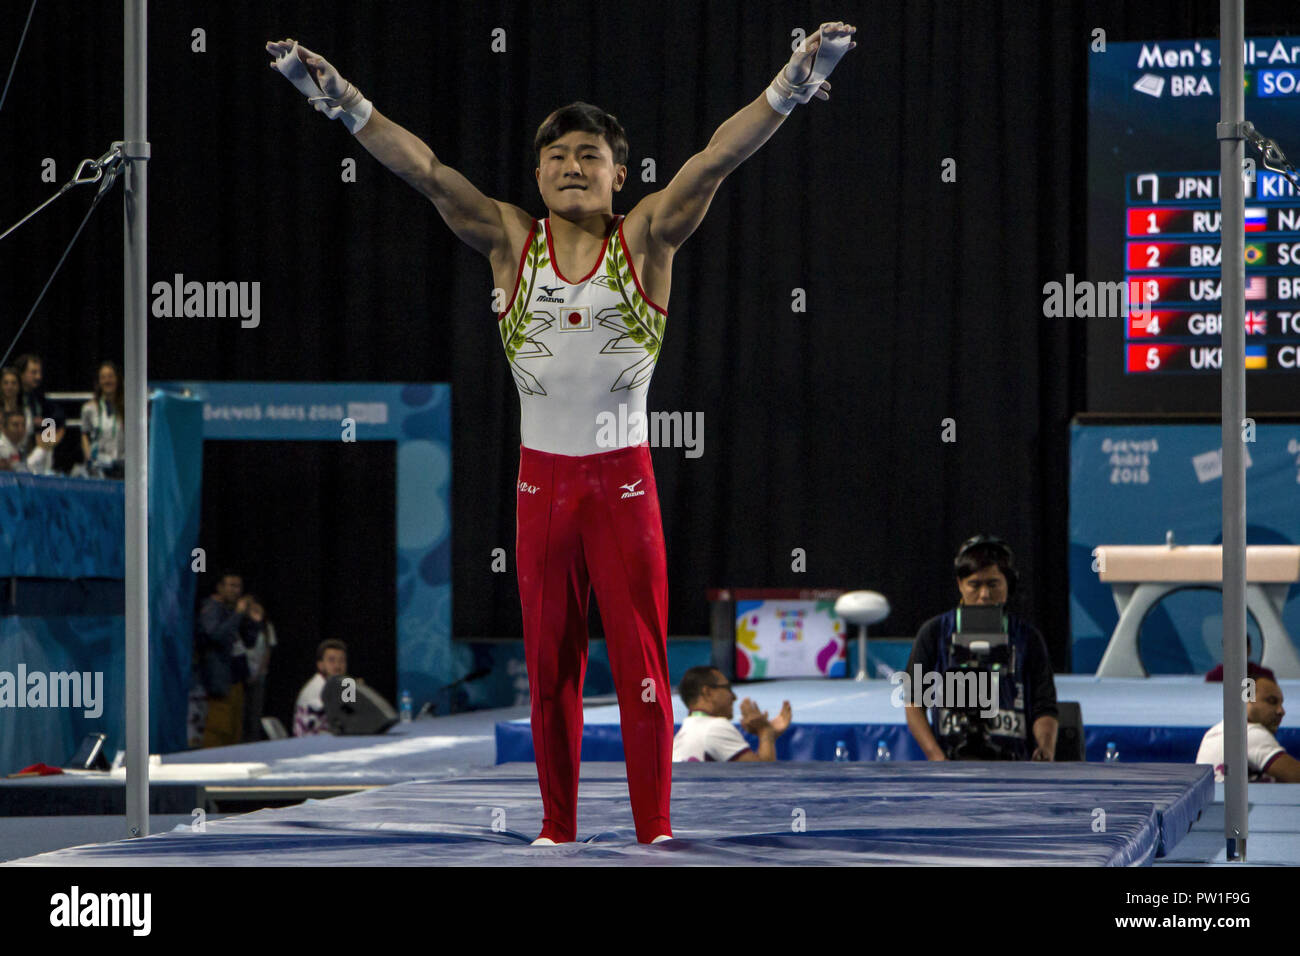 Buenos Aires, Federal Capital, Argentina. 11th Oct, 2018. The Japanese Kitazono Takeru was the winner of the Gold Medal in the Multiple Masculine Artistic Gymnastics Competition at the 2018 Buenos Aires Youth Olympic Games. Credit: Roberto Almeida Aveledo/ZUMA Wire/Alamy Live News Stock Photo